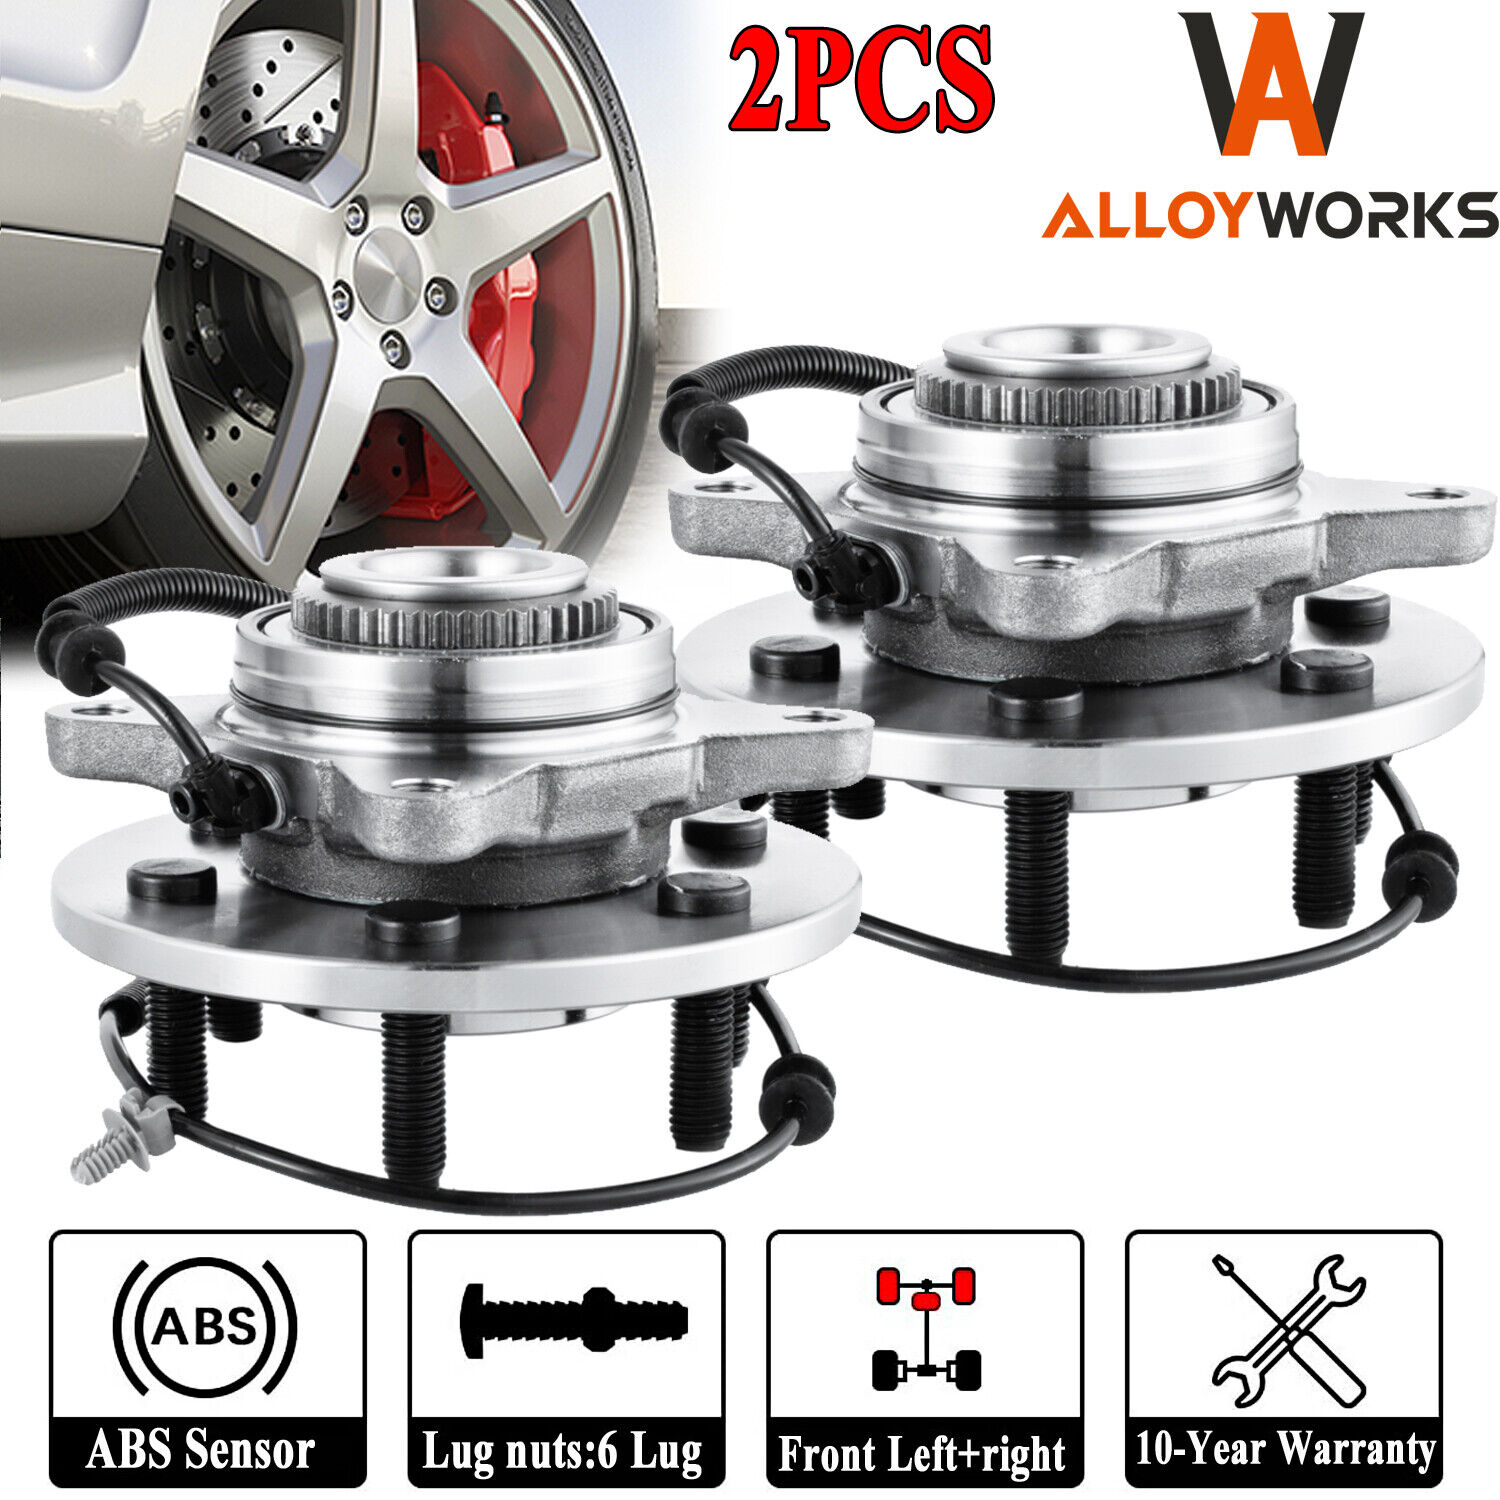 2Pcs Front Wheel Bearing &Hub Assembly Fit Ford F150 Lincoln Mark LT w/ ABS 4WD